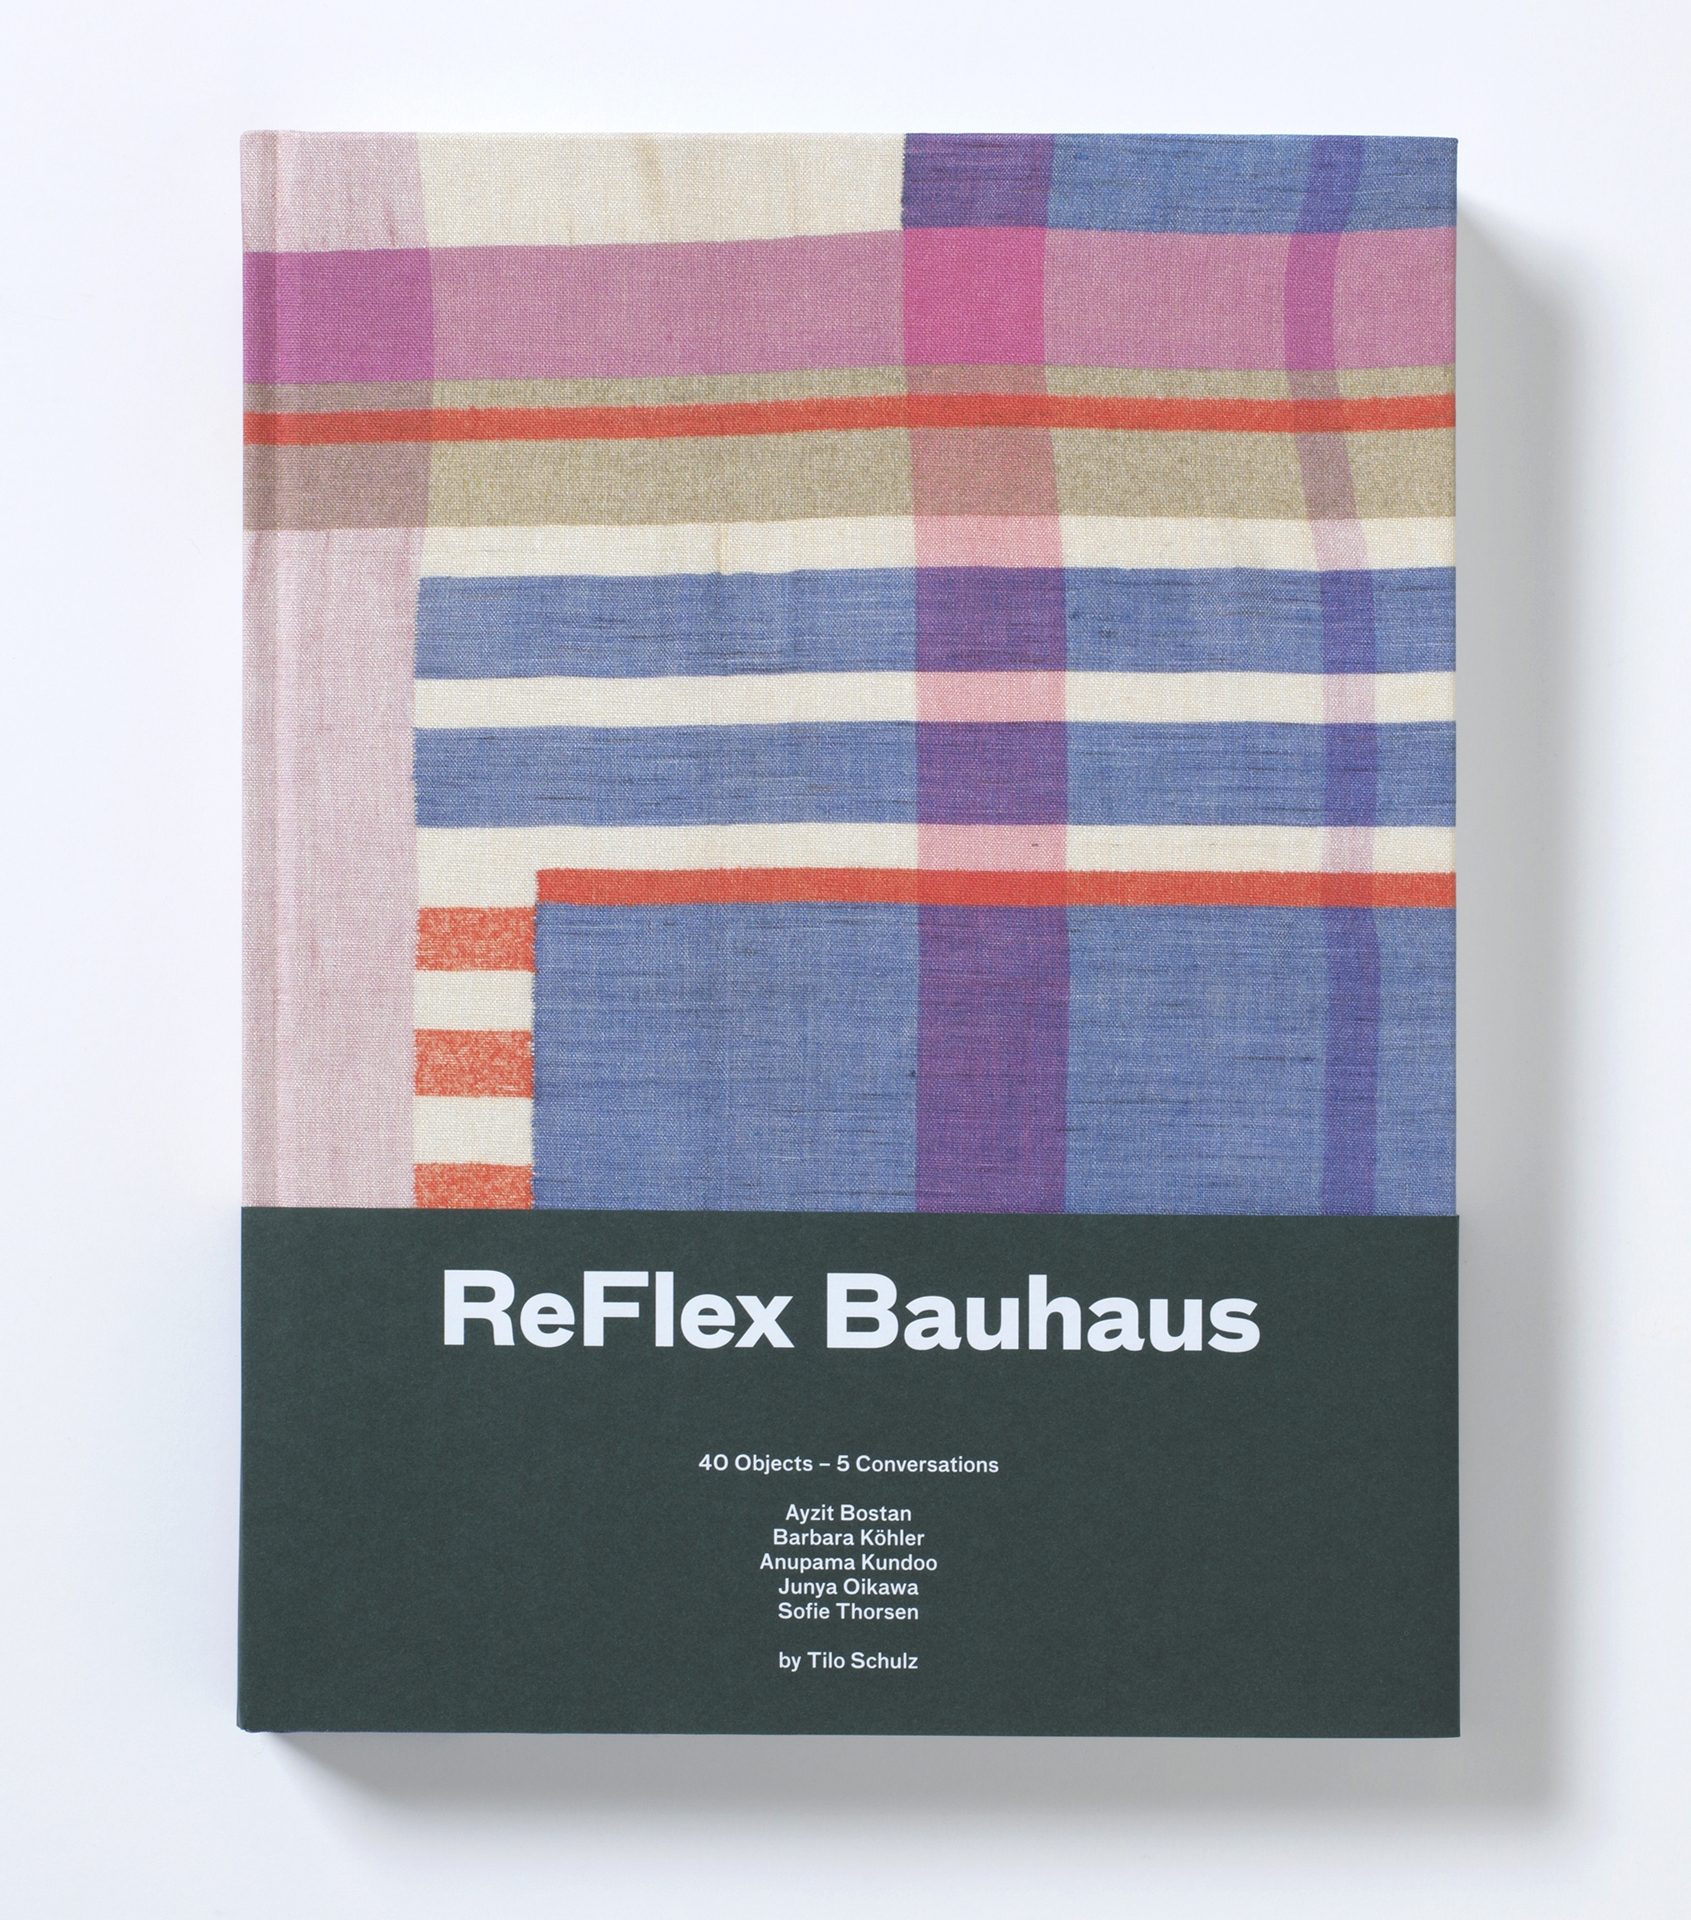 Fabric with vertical and horizontal lines that overlap irregularly to form rectangles. Paper sleeve in the lower third, black surface with white labelling: ReFlex Bauhaus.